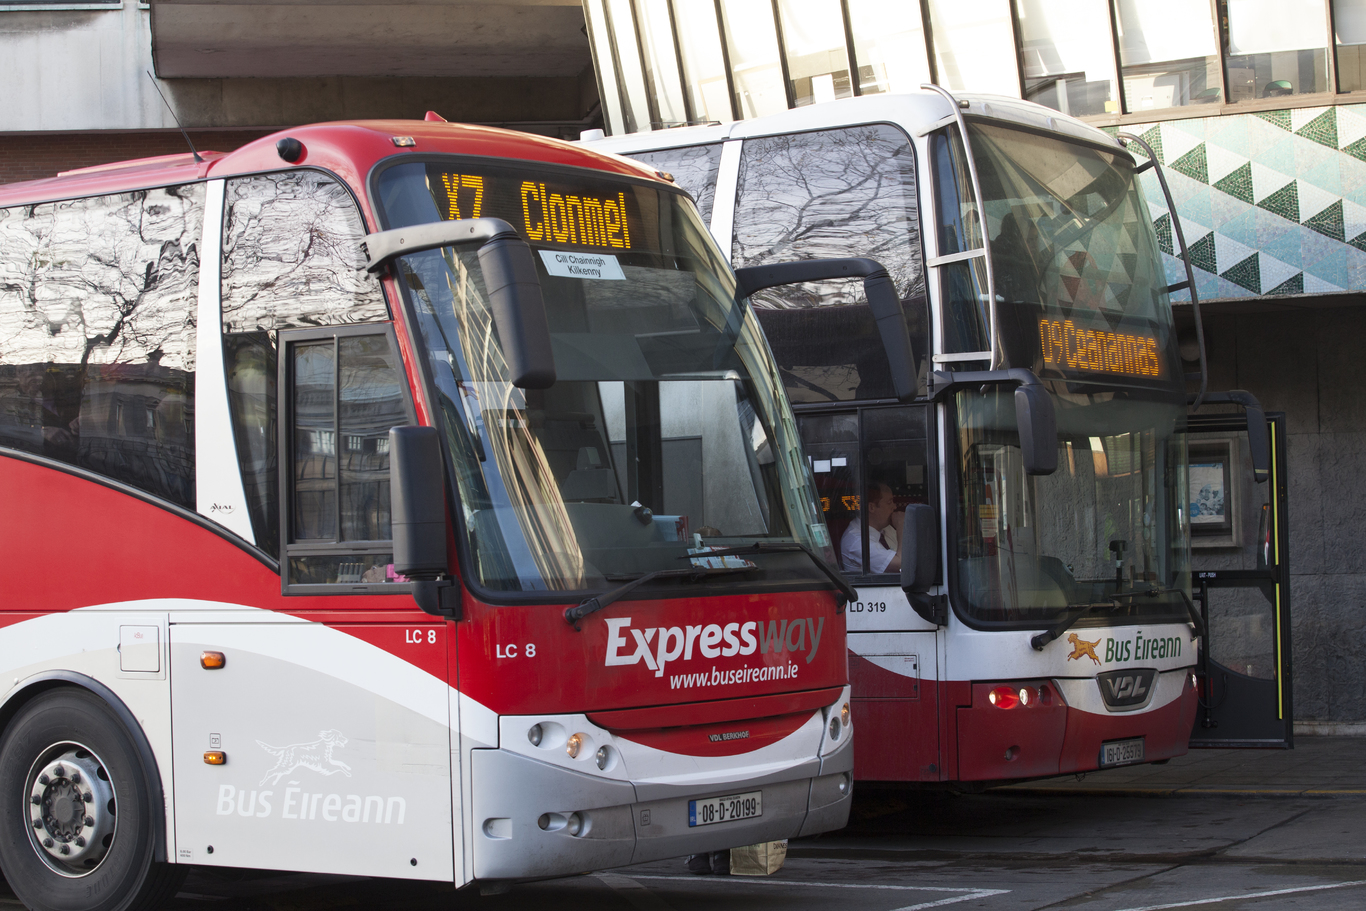 bus-ireann-says-it-will-continue-expressway-services-but-jobs-still-at-risk-fora